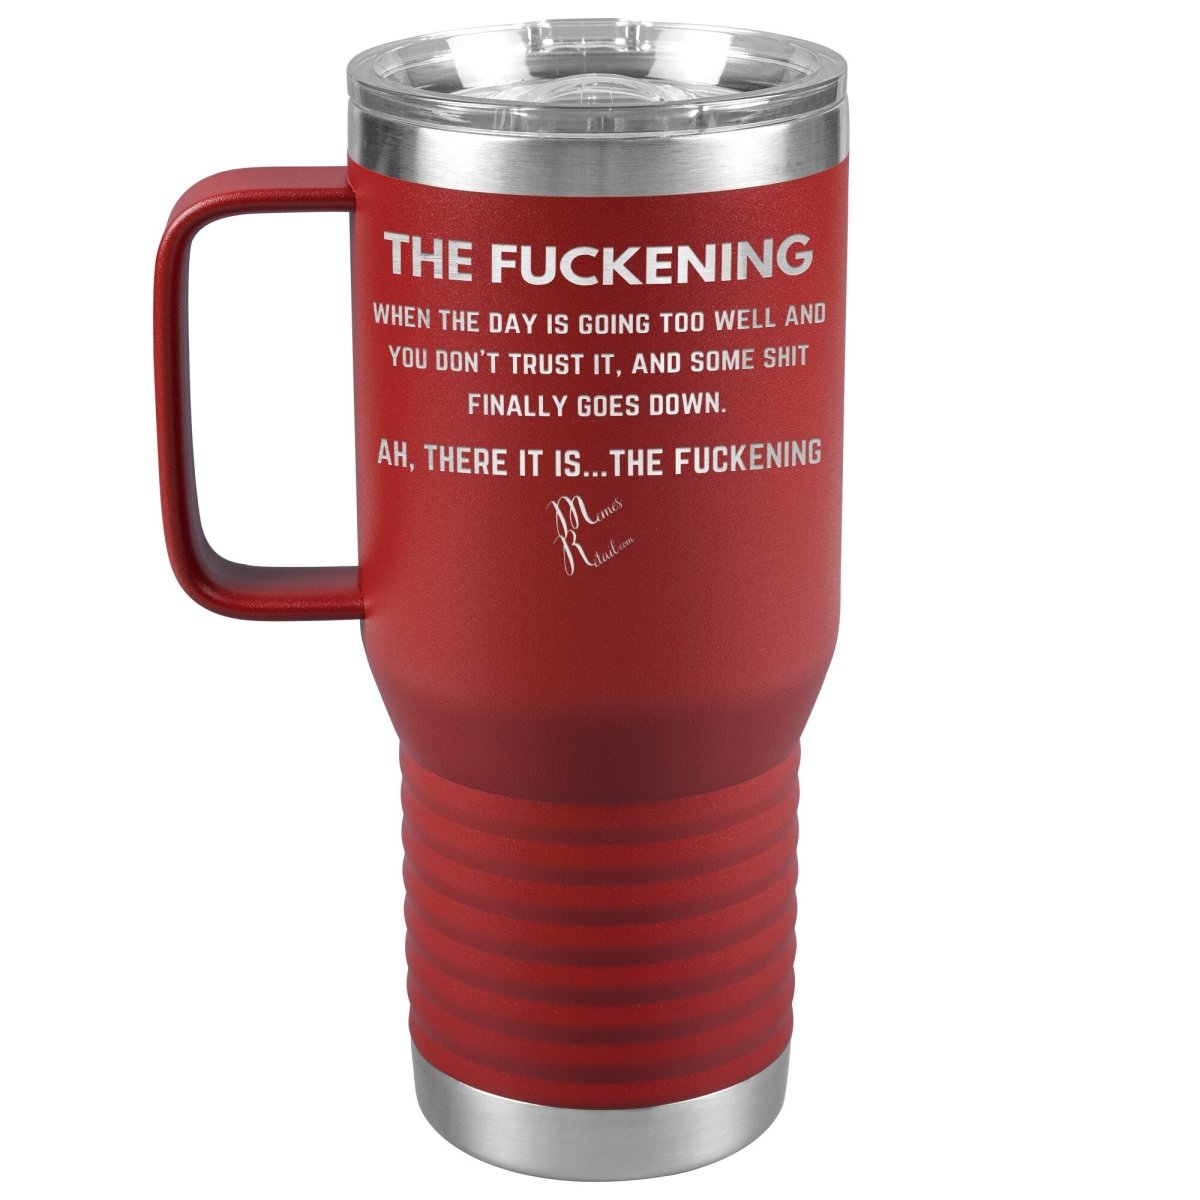 The Fuckening, When you don't trust the day Tumblers, 20oz Travel Tumbler / Red - MemesRetail.com